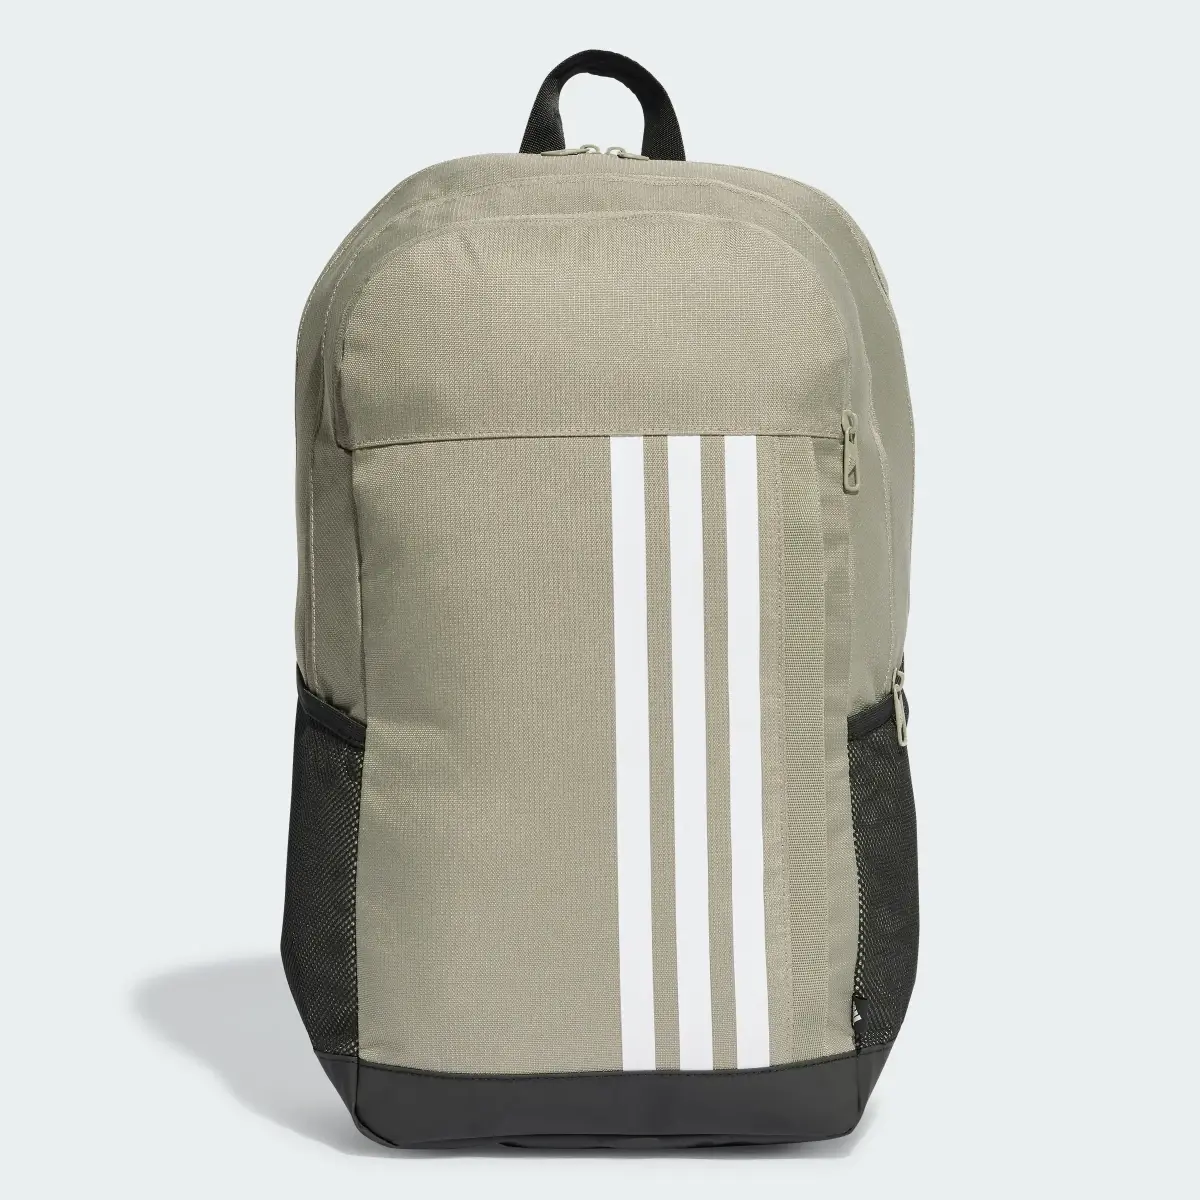 Adidas Motion 3-Stripes Backpack. 1